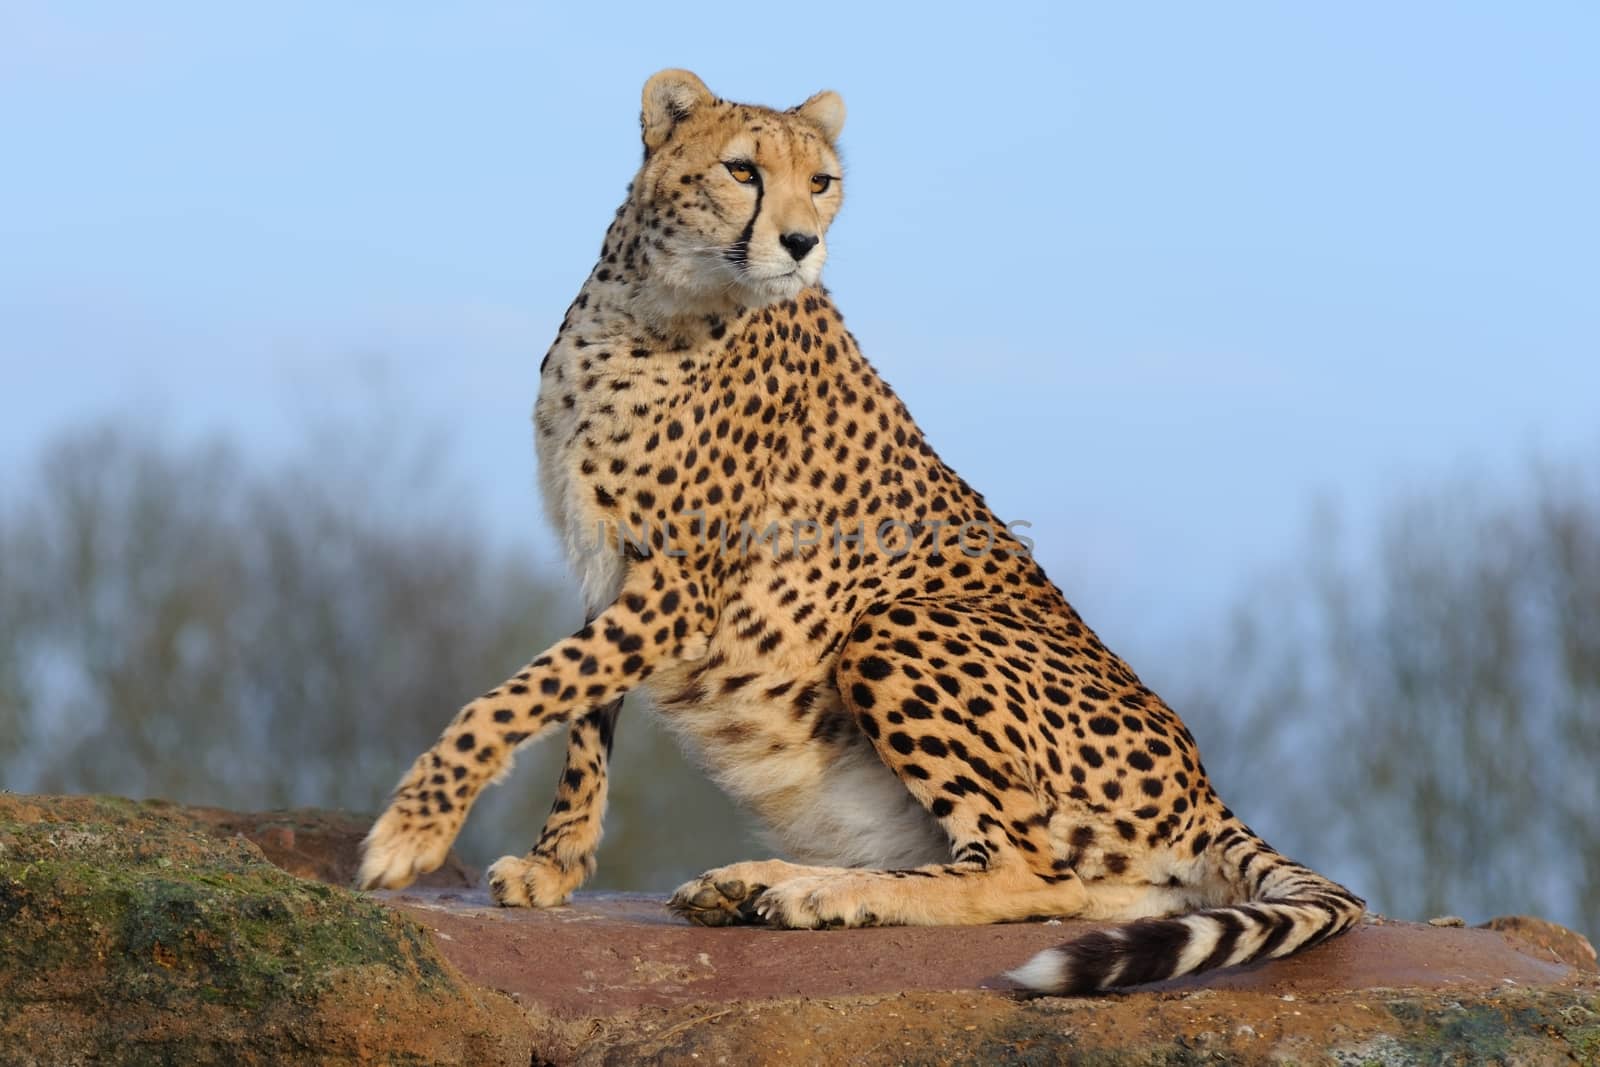 Cheetah on a rock lookind into the distance